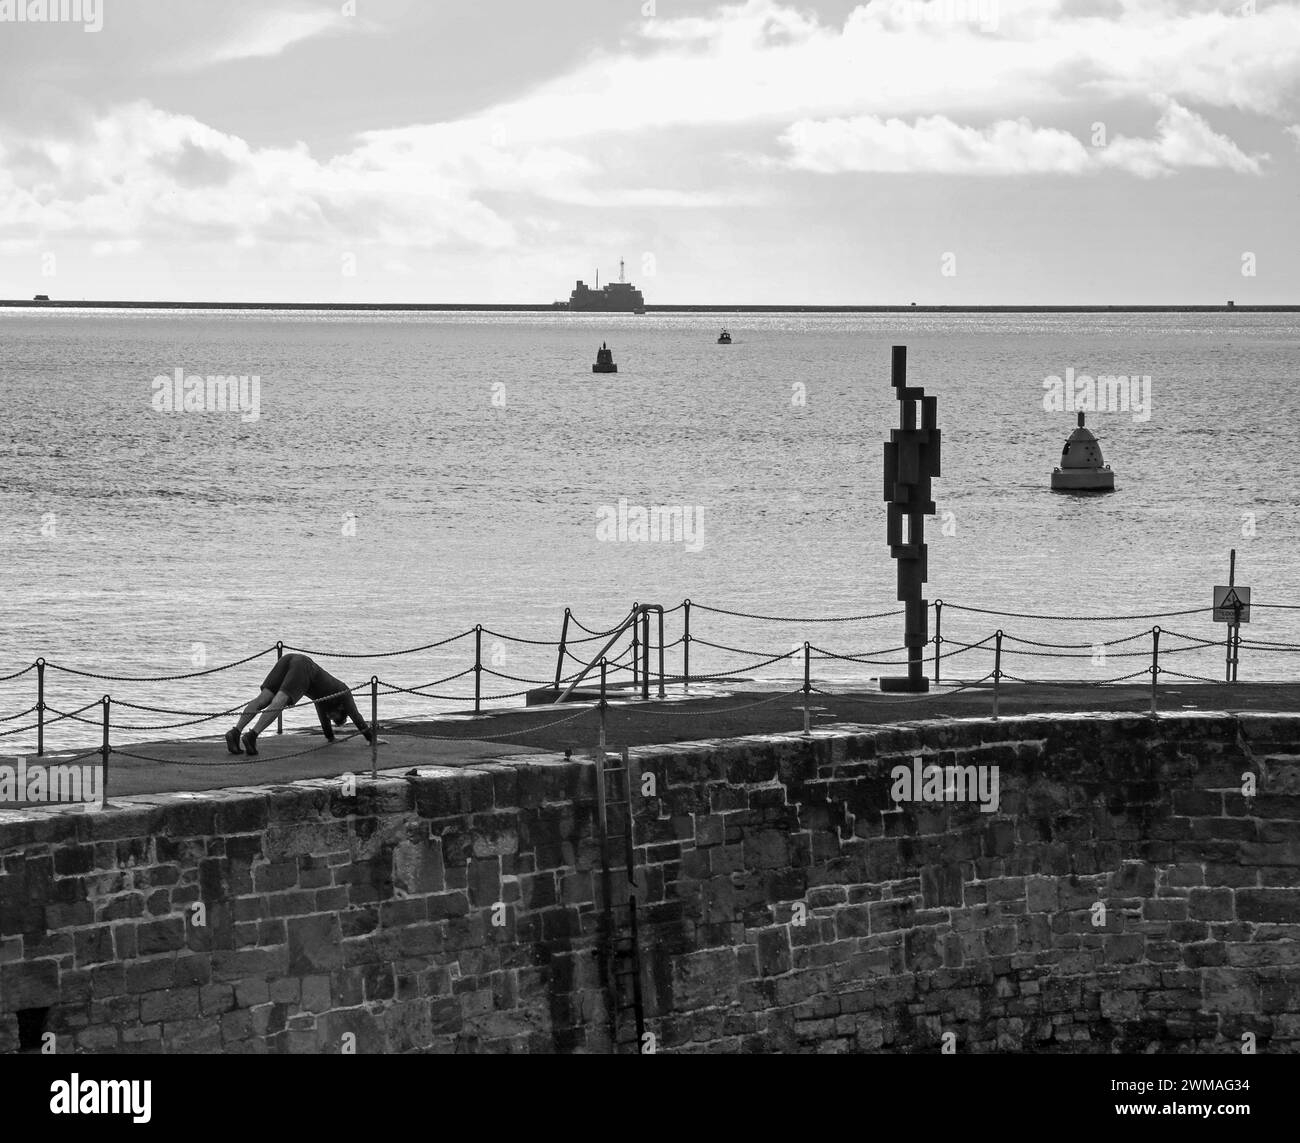 Press Up execises or worshiping fine art, a young man with Sir Anthony Gormley’s ‘Look II’ 12ft sculpture on West Hoe Pier Plymouth. The controversial Stock Photo